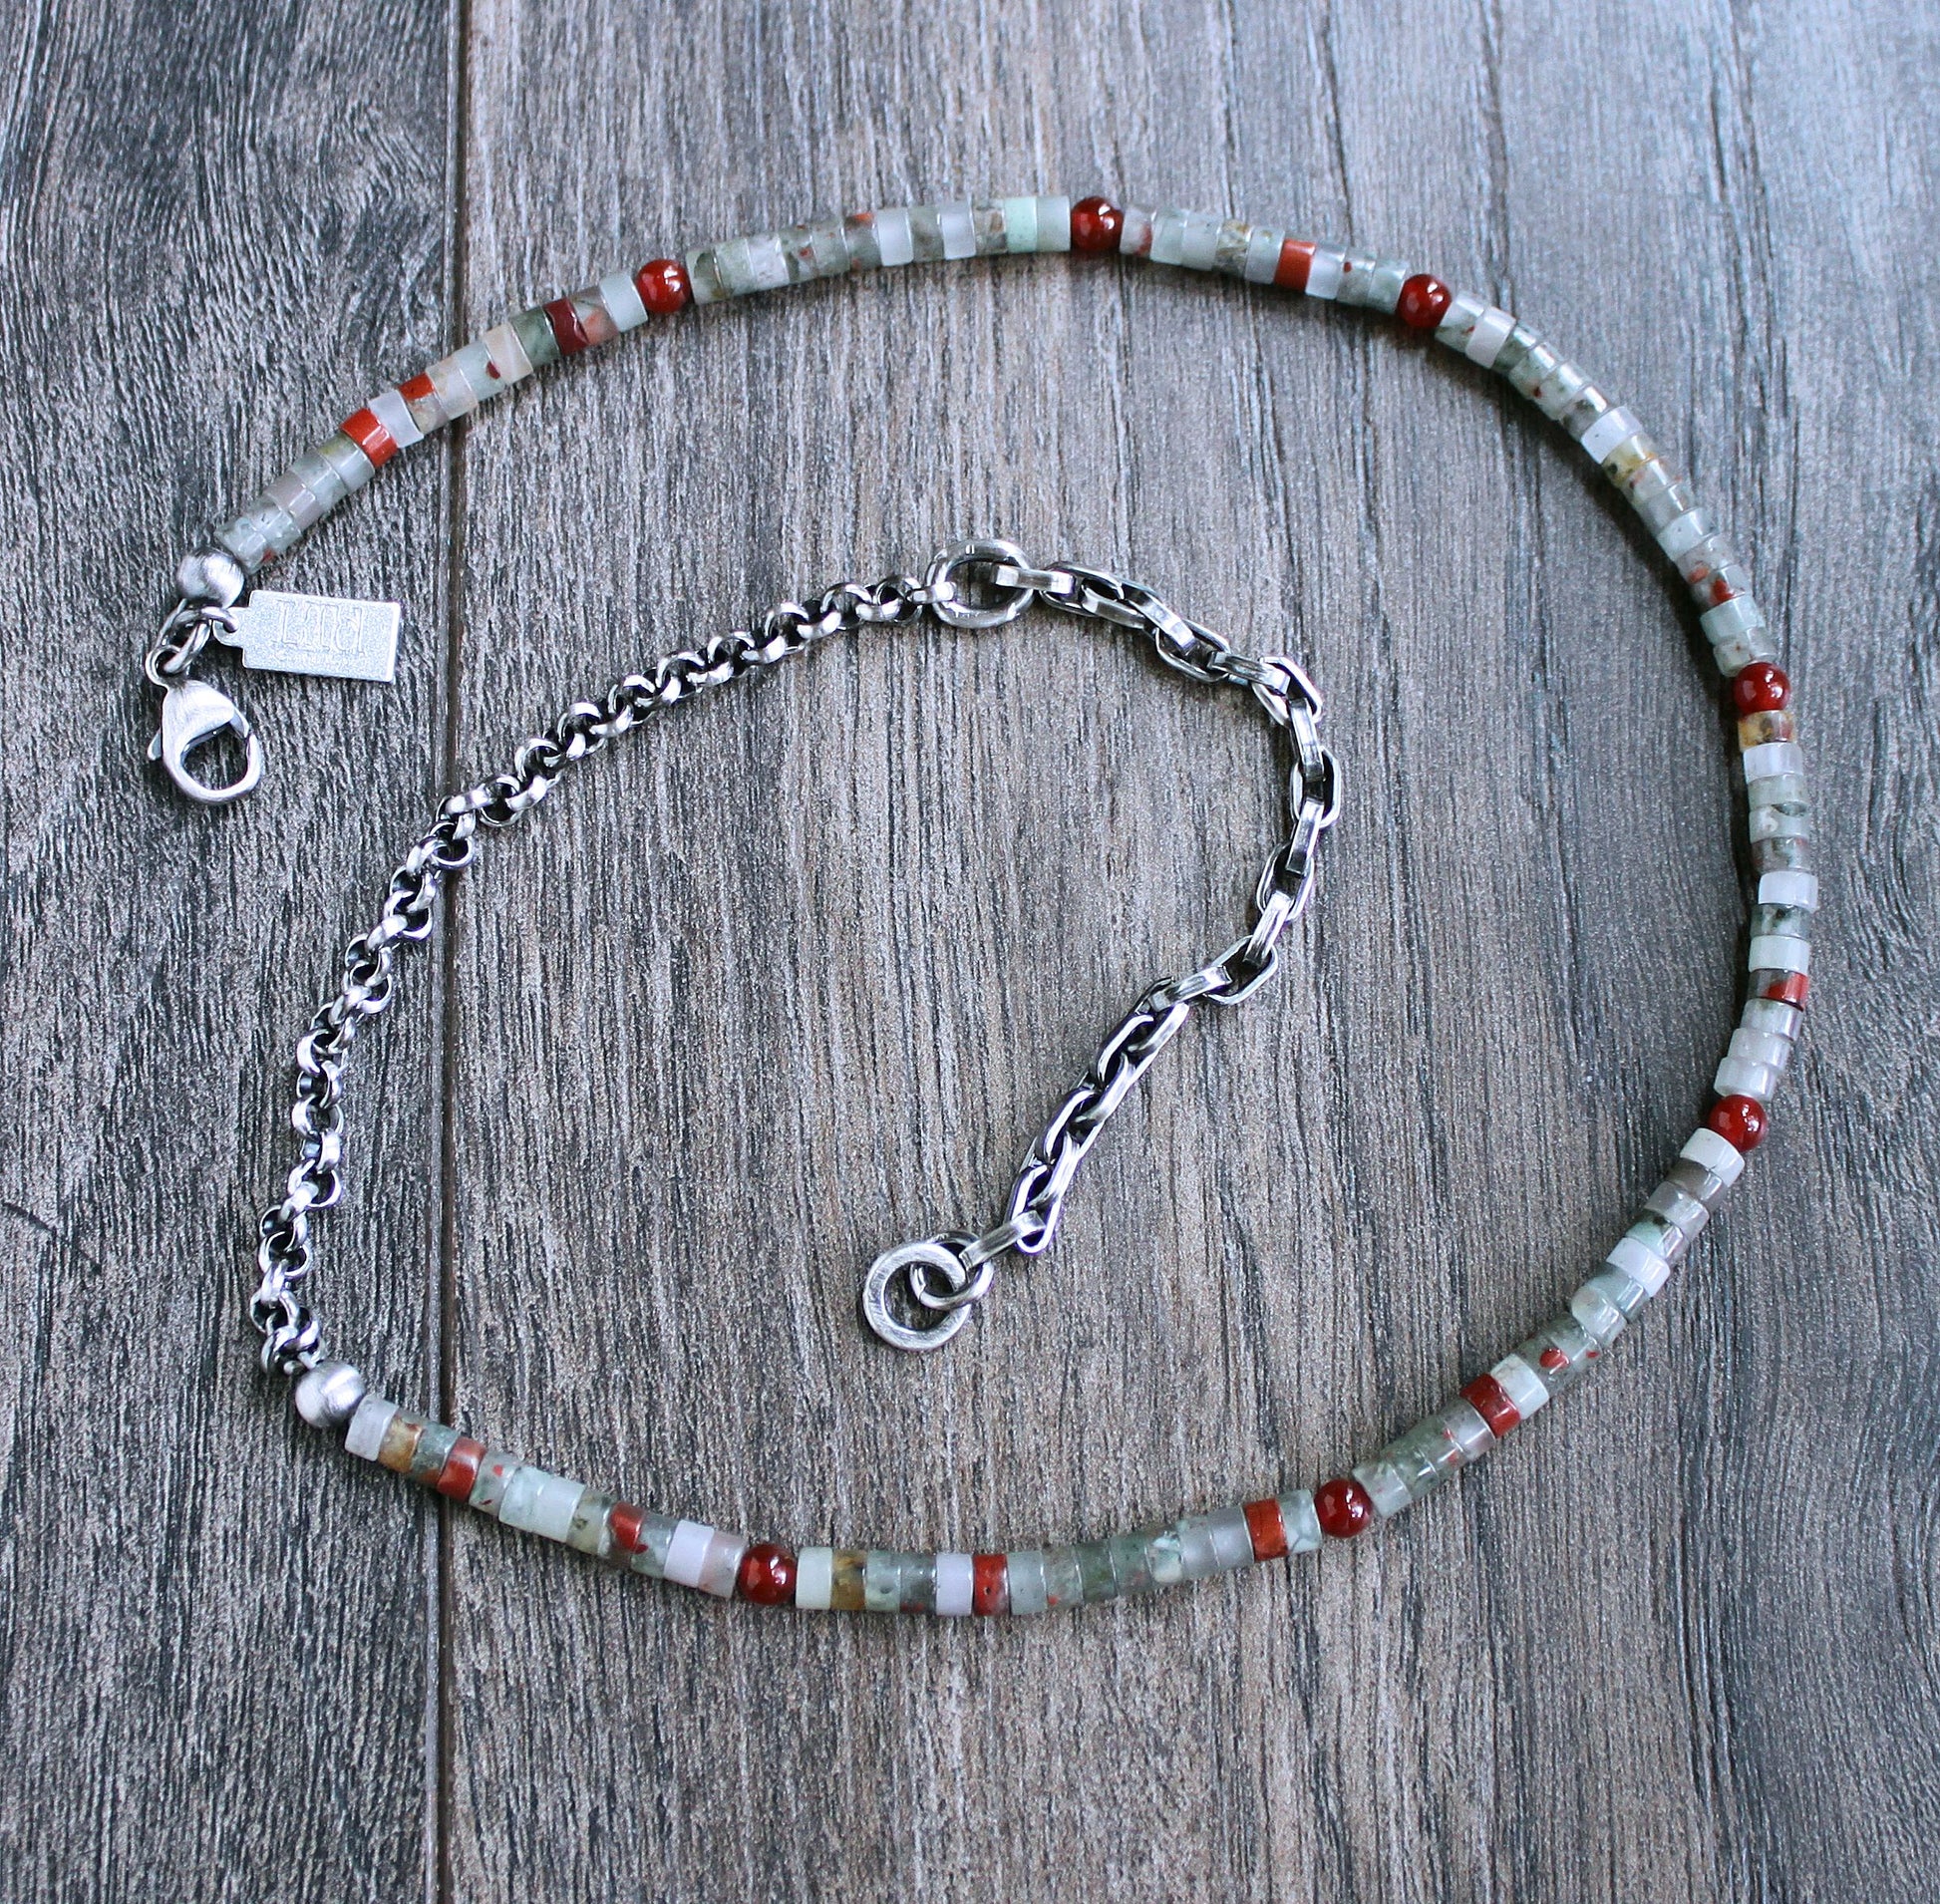 Men's Heishi Bead and Chain necklace